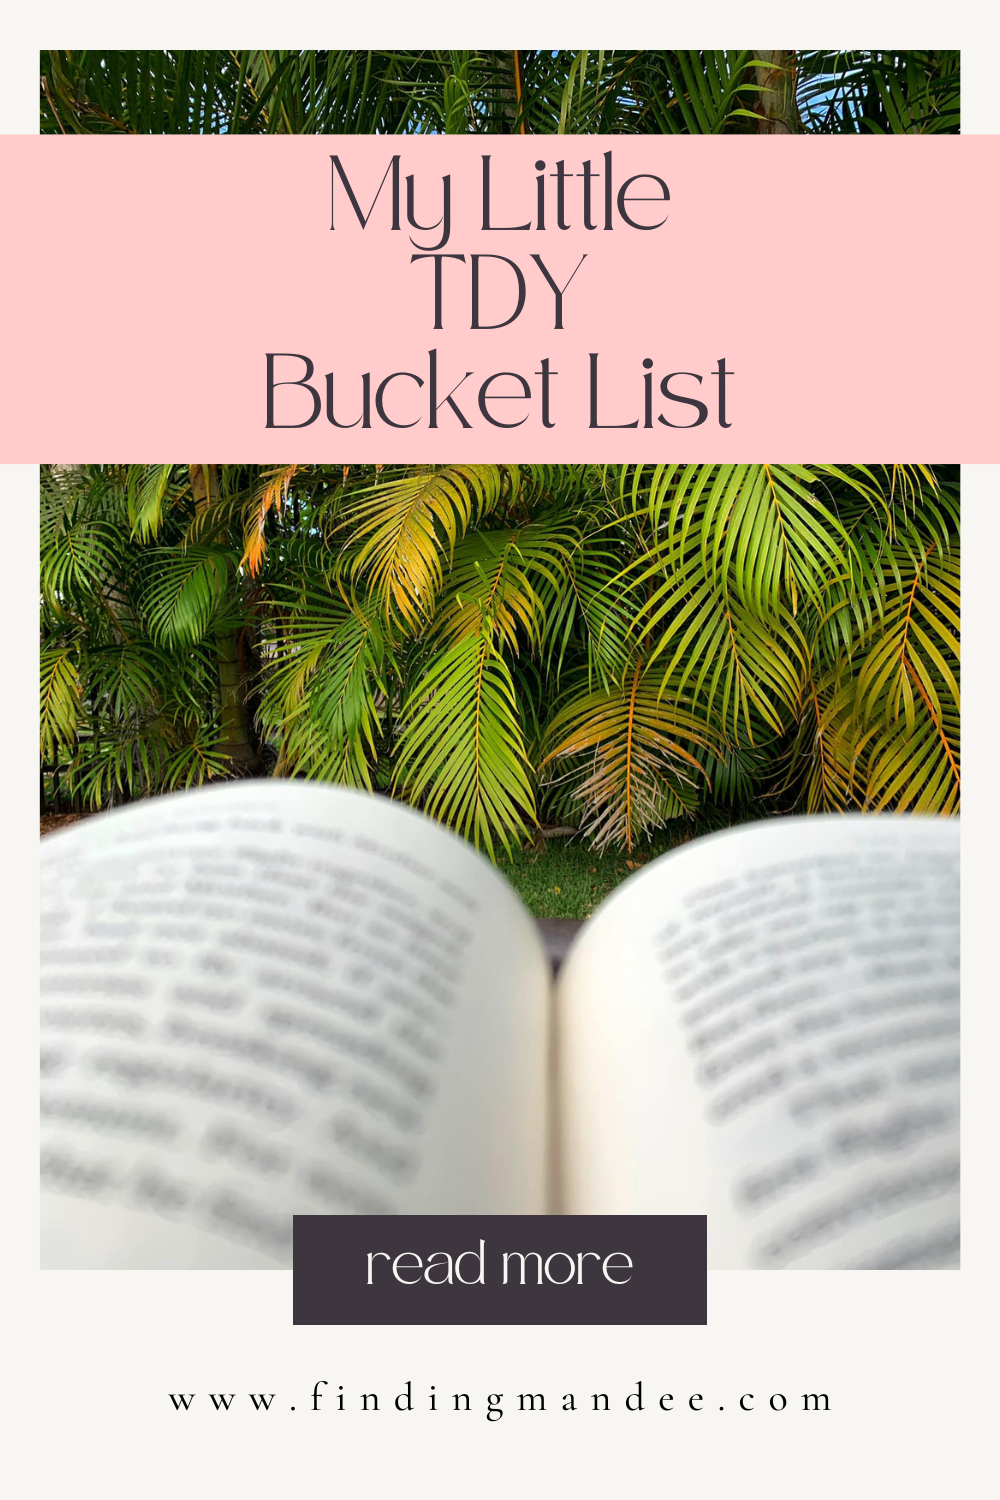 My Little TDY Bucket List: 25 Things to do While He's Away | Finding Mandee